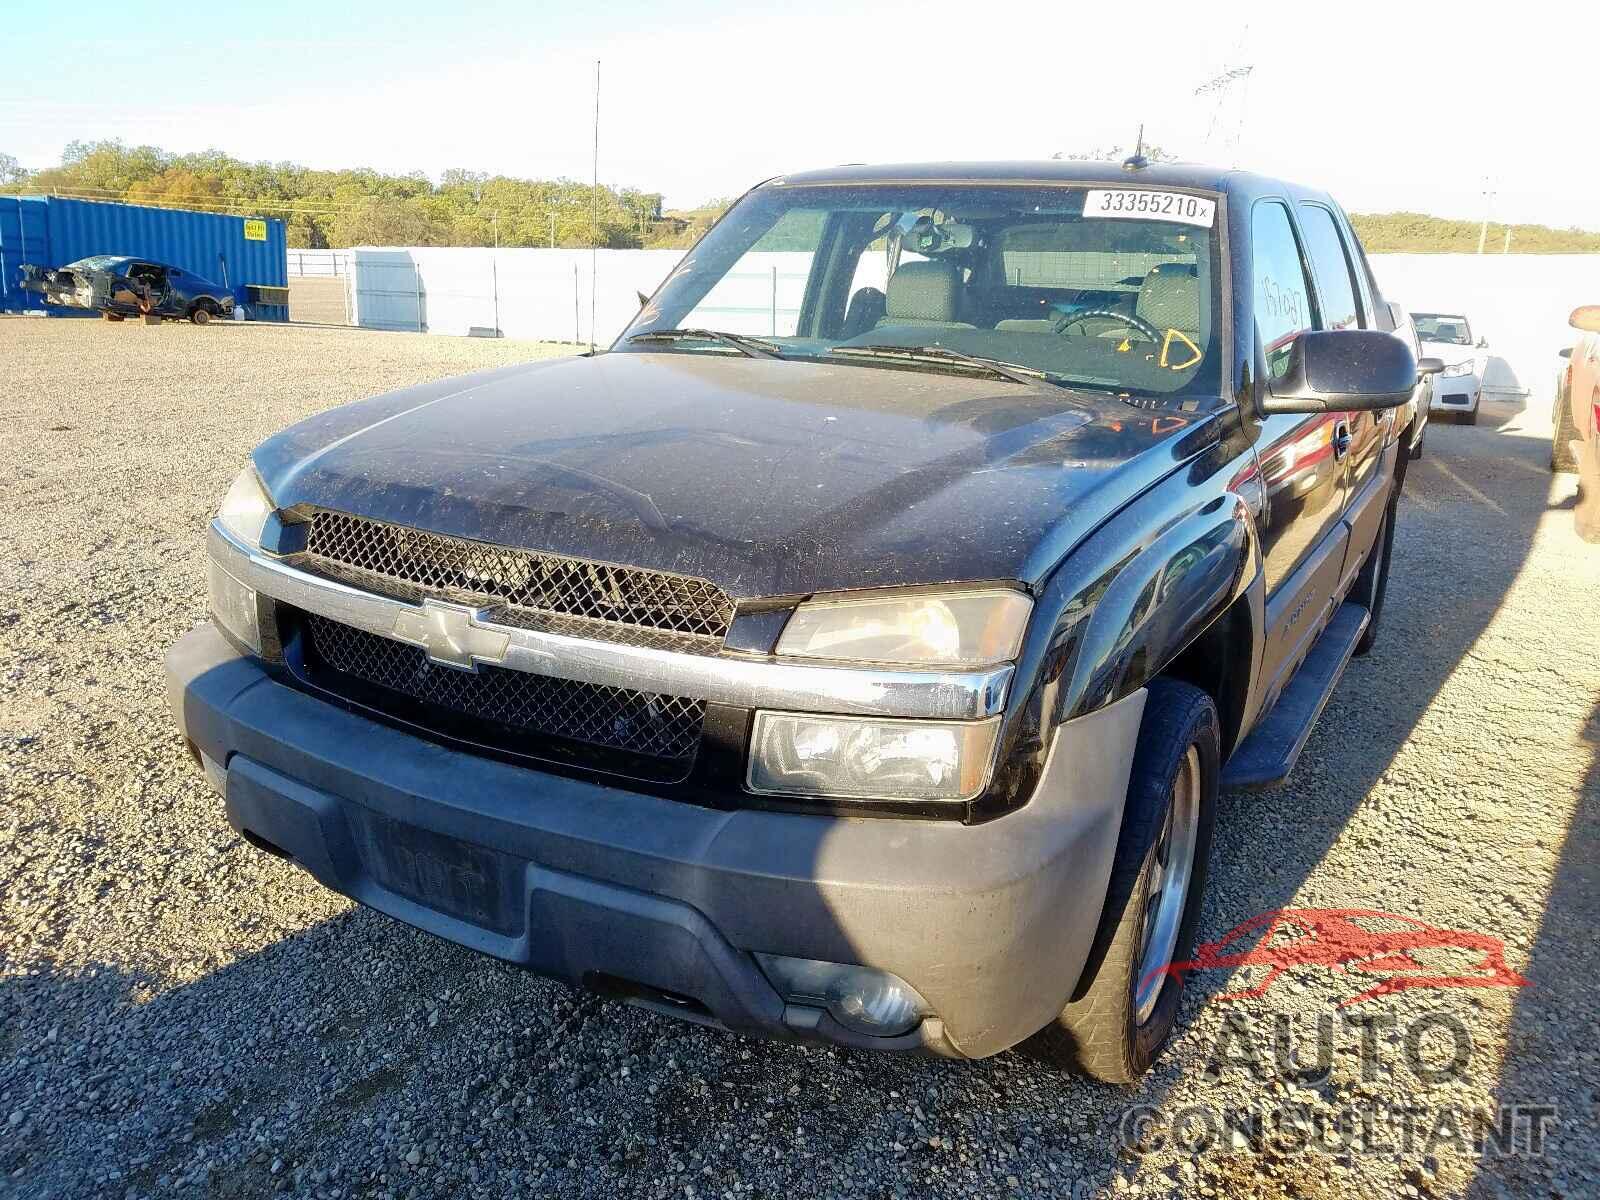 CHEVROLET AVALANCHE 2003 - 1G1BE5SM6H7160256